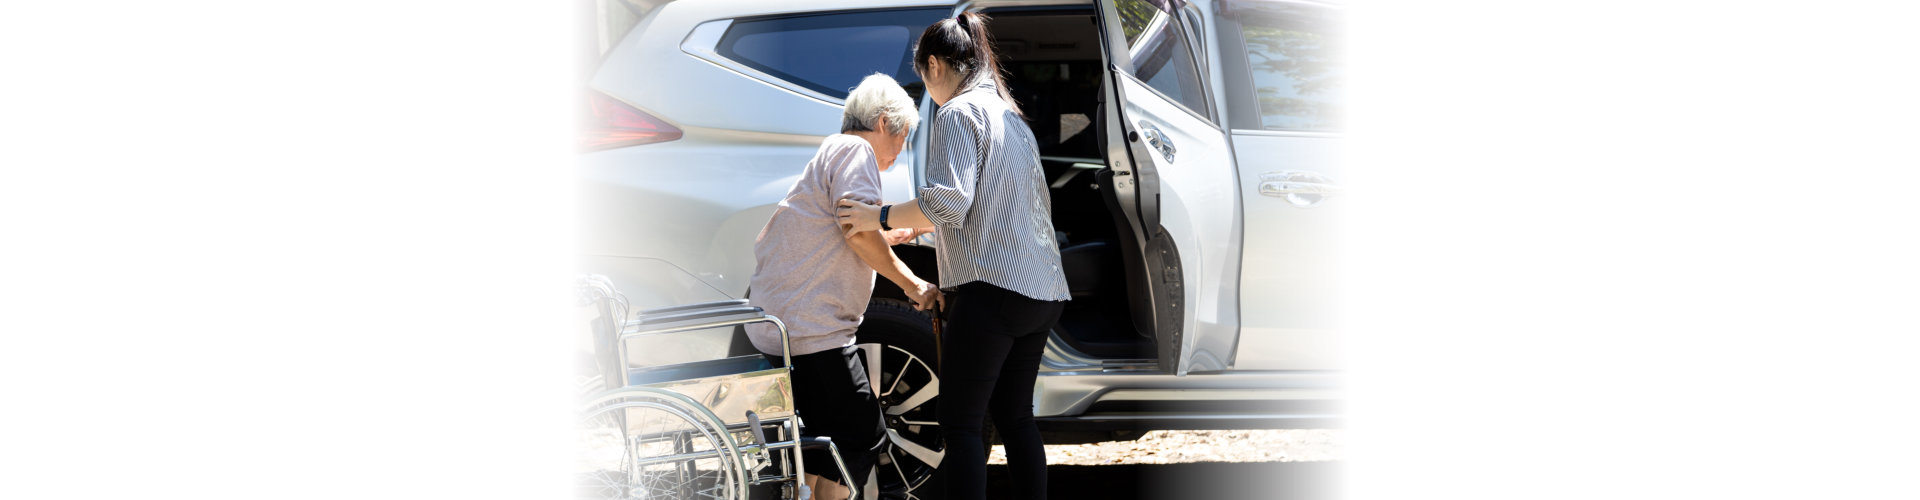 Younger woman assisting elderly woman on a wheelchair